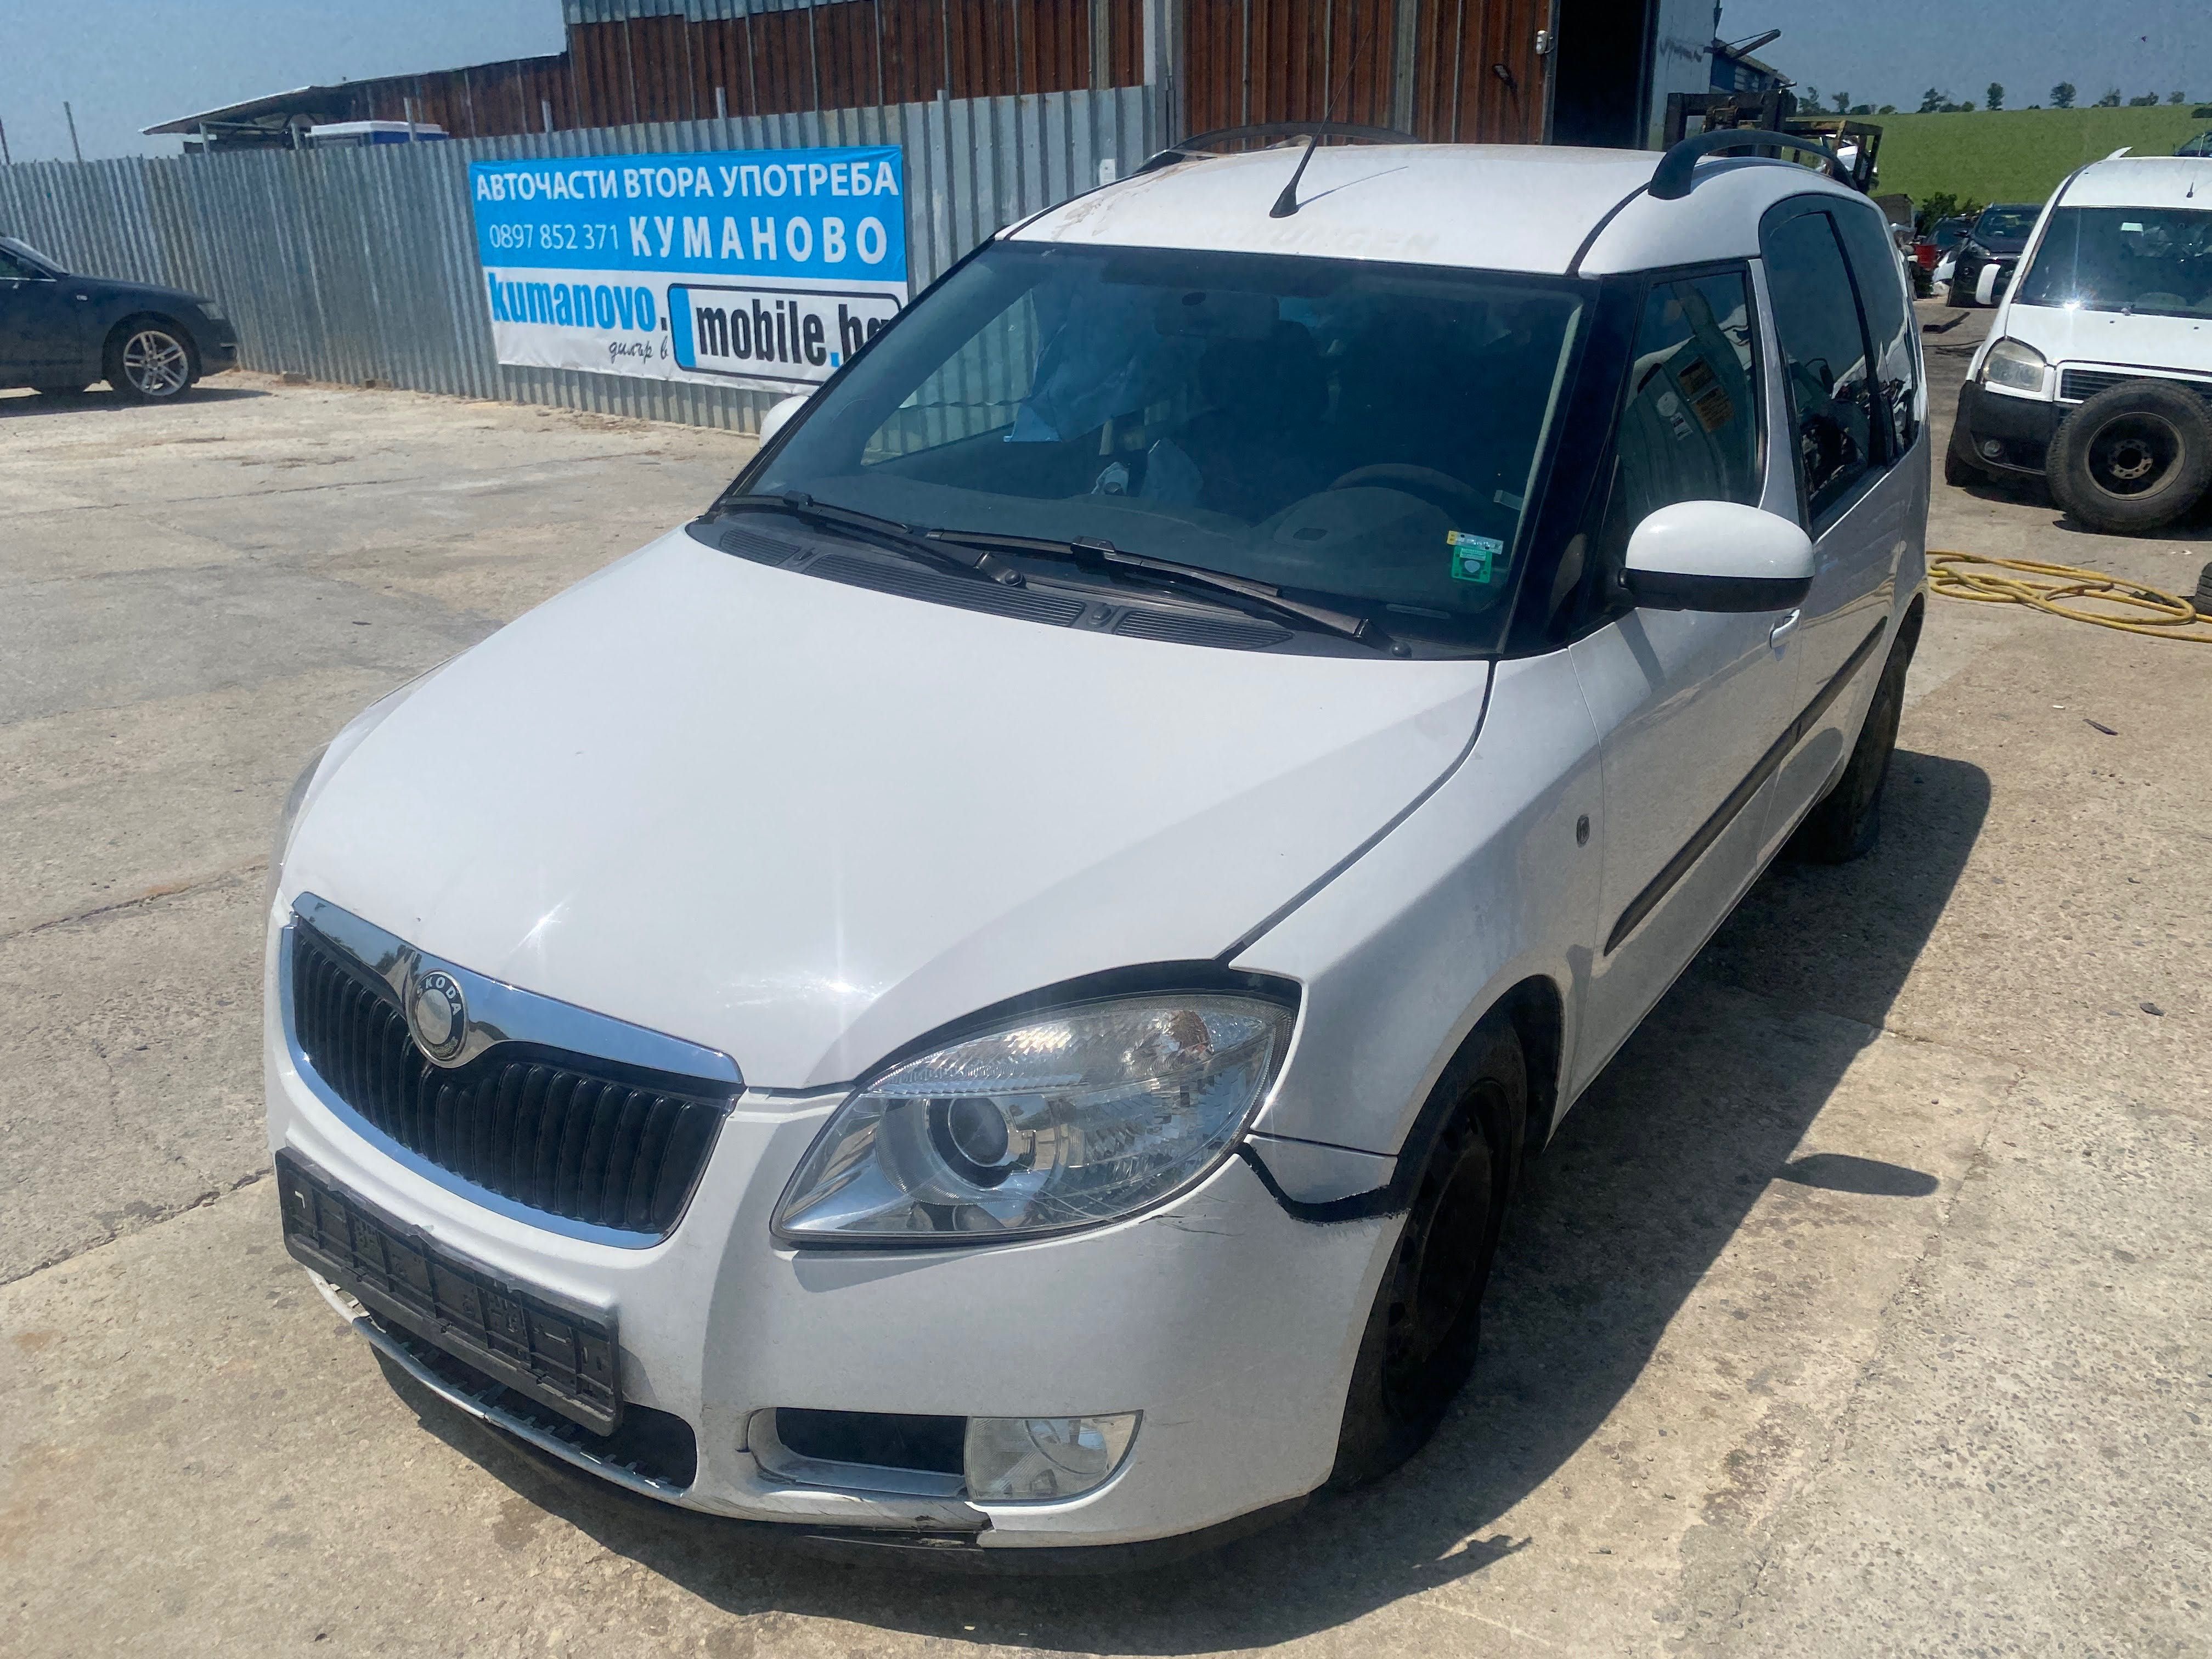 Skoda Roomster 1.6i, 105 ph., automatic, engine BTS, 2009